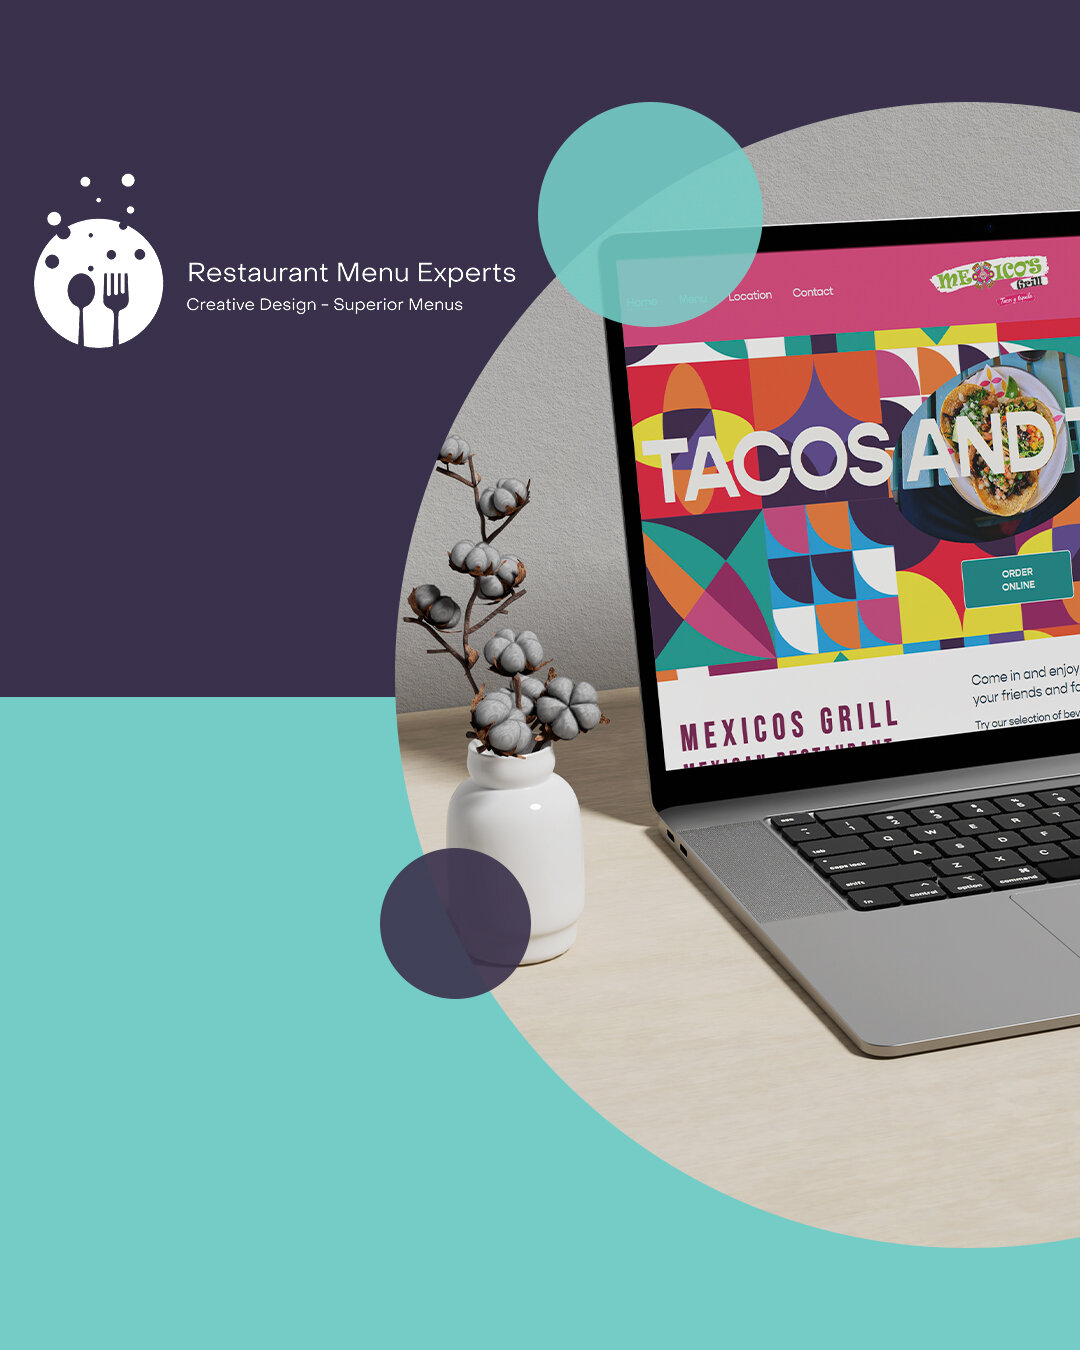 Discover our menu Design and Engineering. 💥

We capture your business and showcase your brand with graphics that will inspire your audience. 🌐

Join the digital revolution to transform your menu, and embrace digital ordering! 🖥️

Visit our website